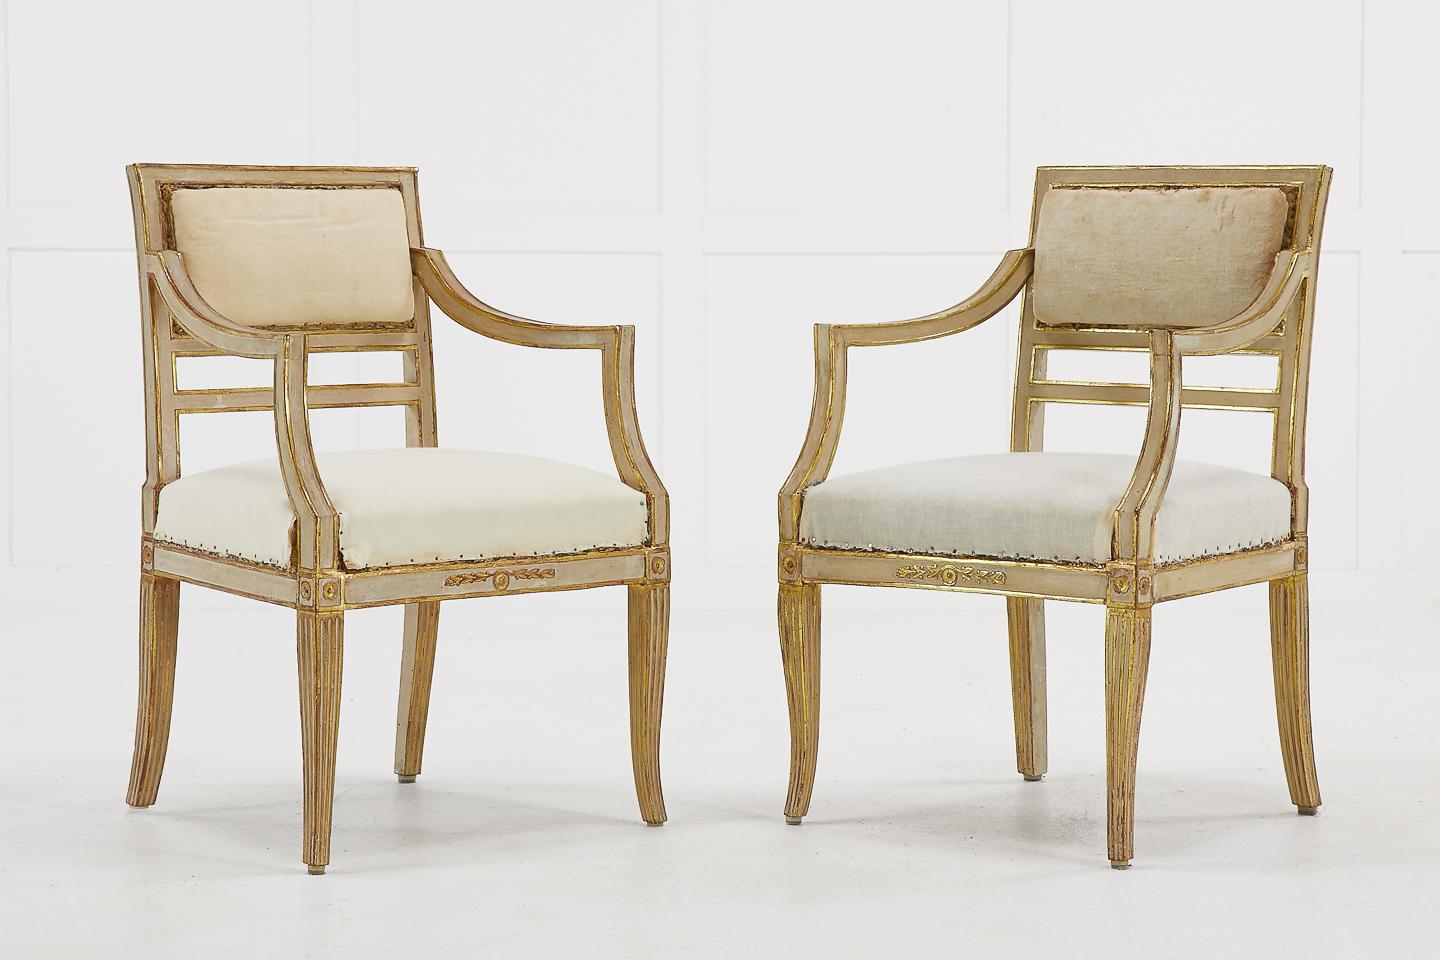 Pair of small Italian gilt and paint chairs stripped back to their calico, circa 1910.

Measures: Seat height 41cm
Seat depth 41.5cm.